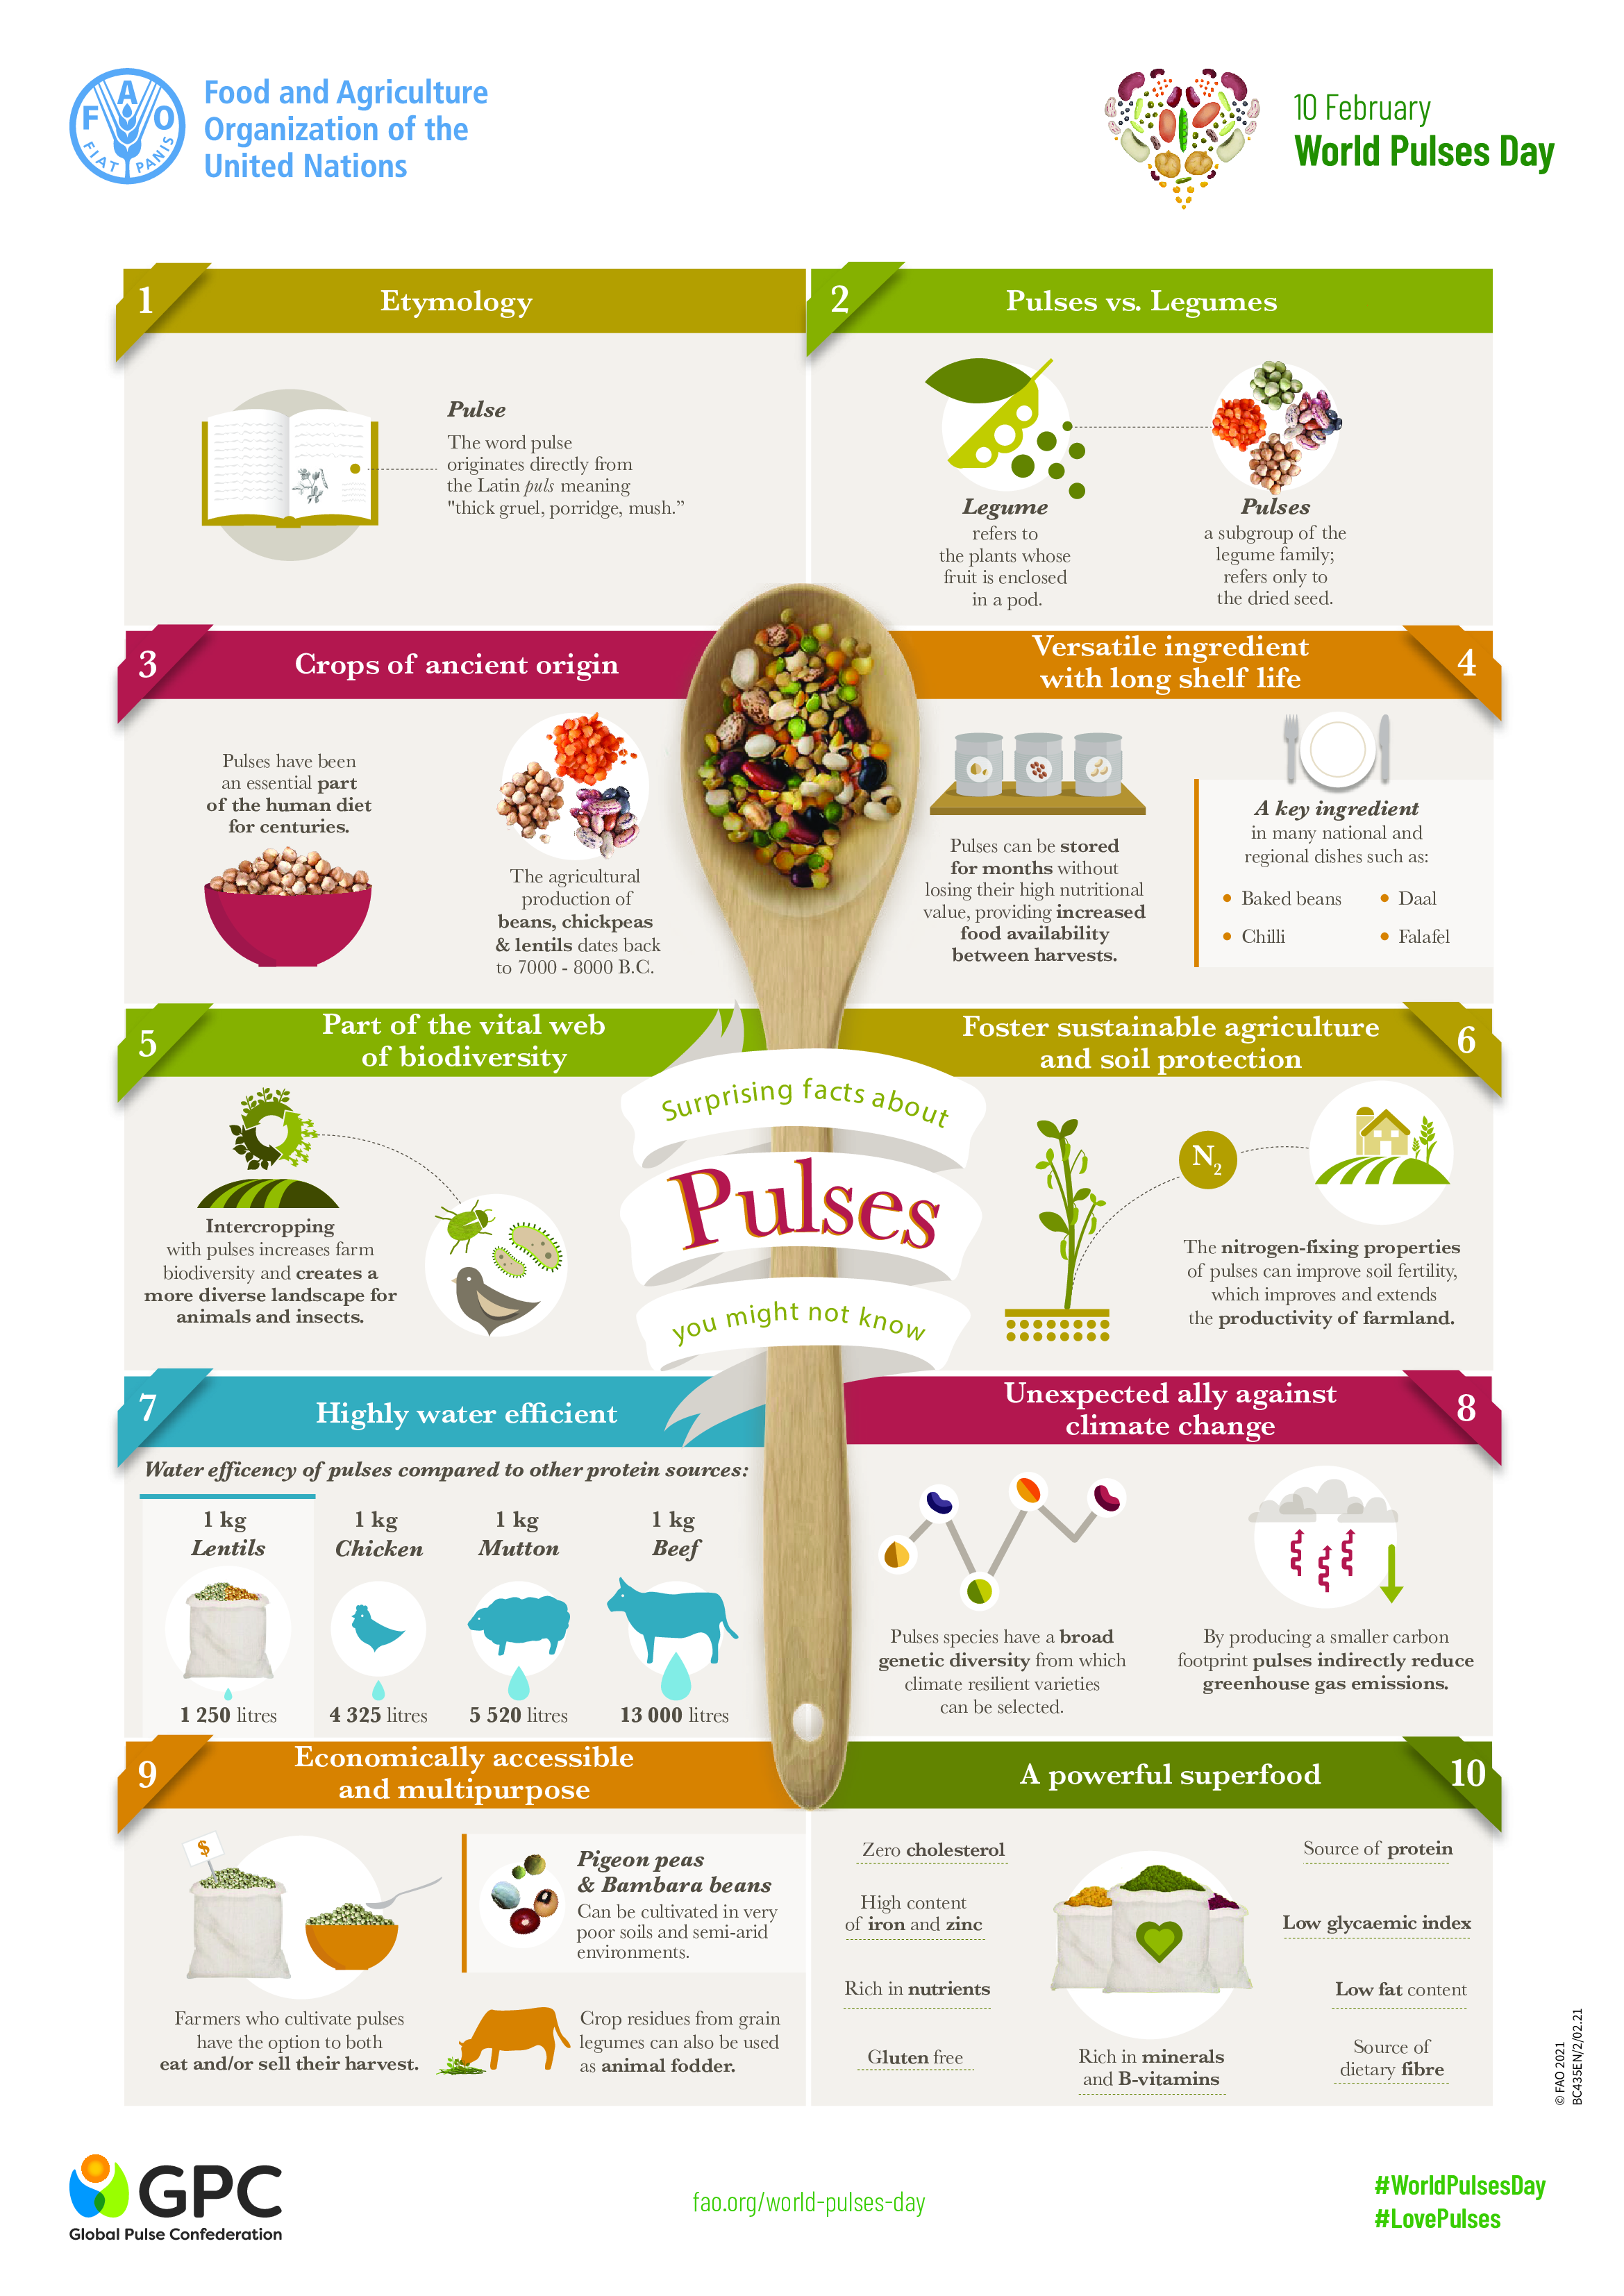 Surprising Facts about Pulses